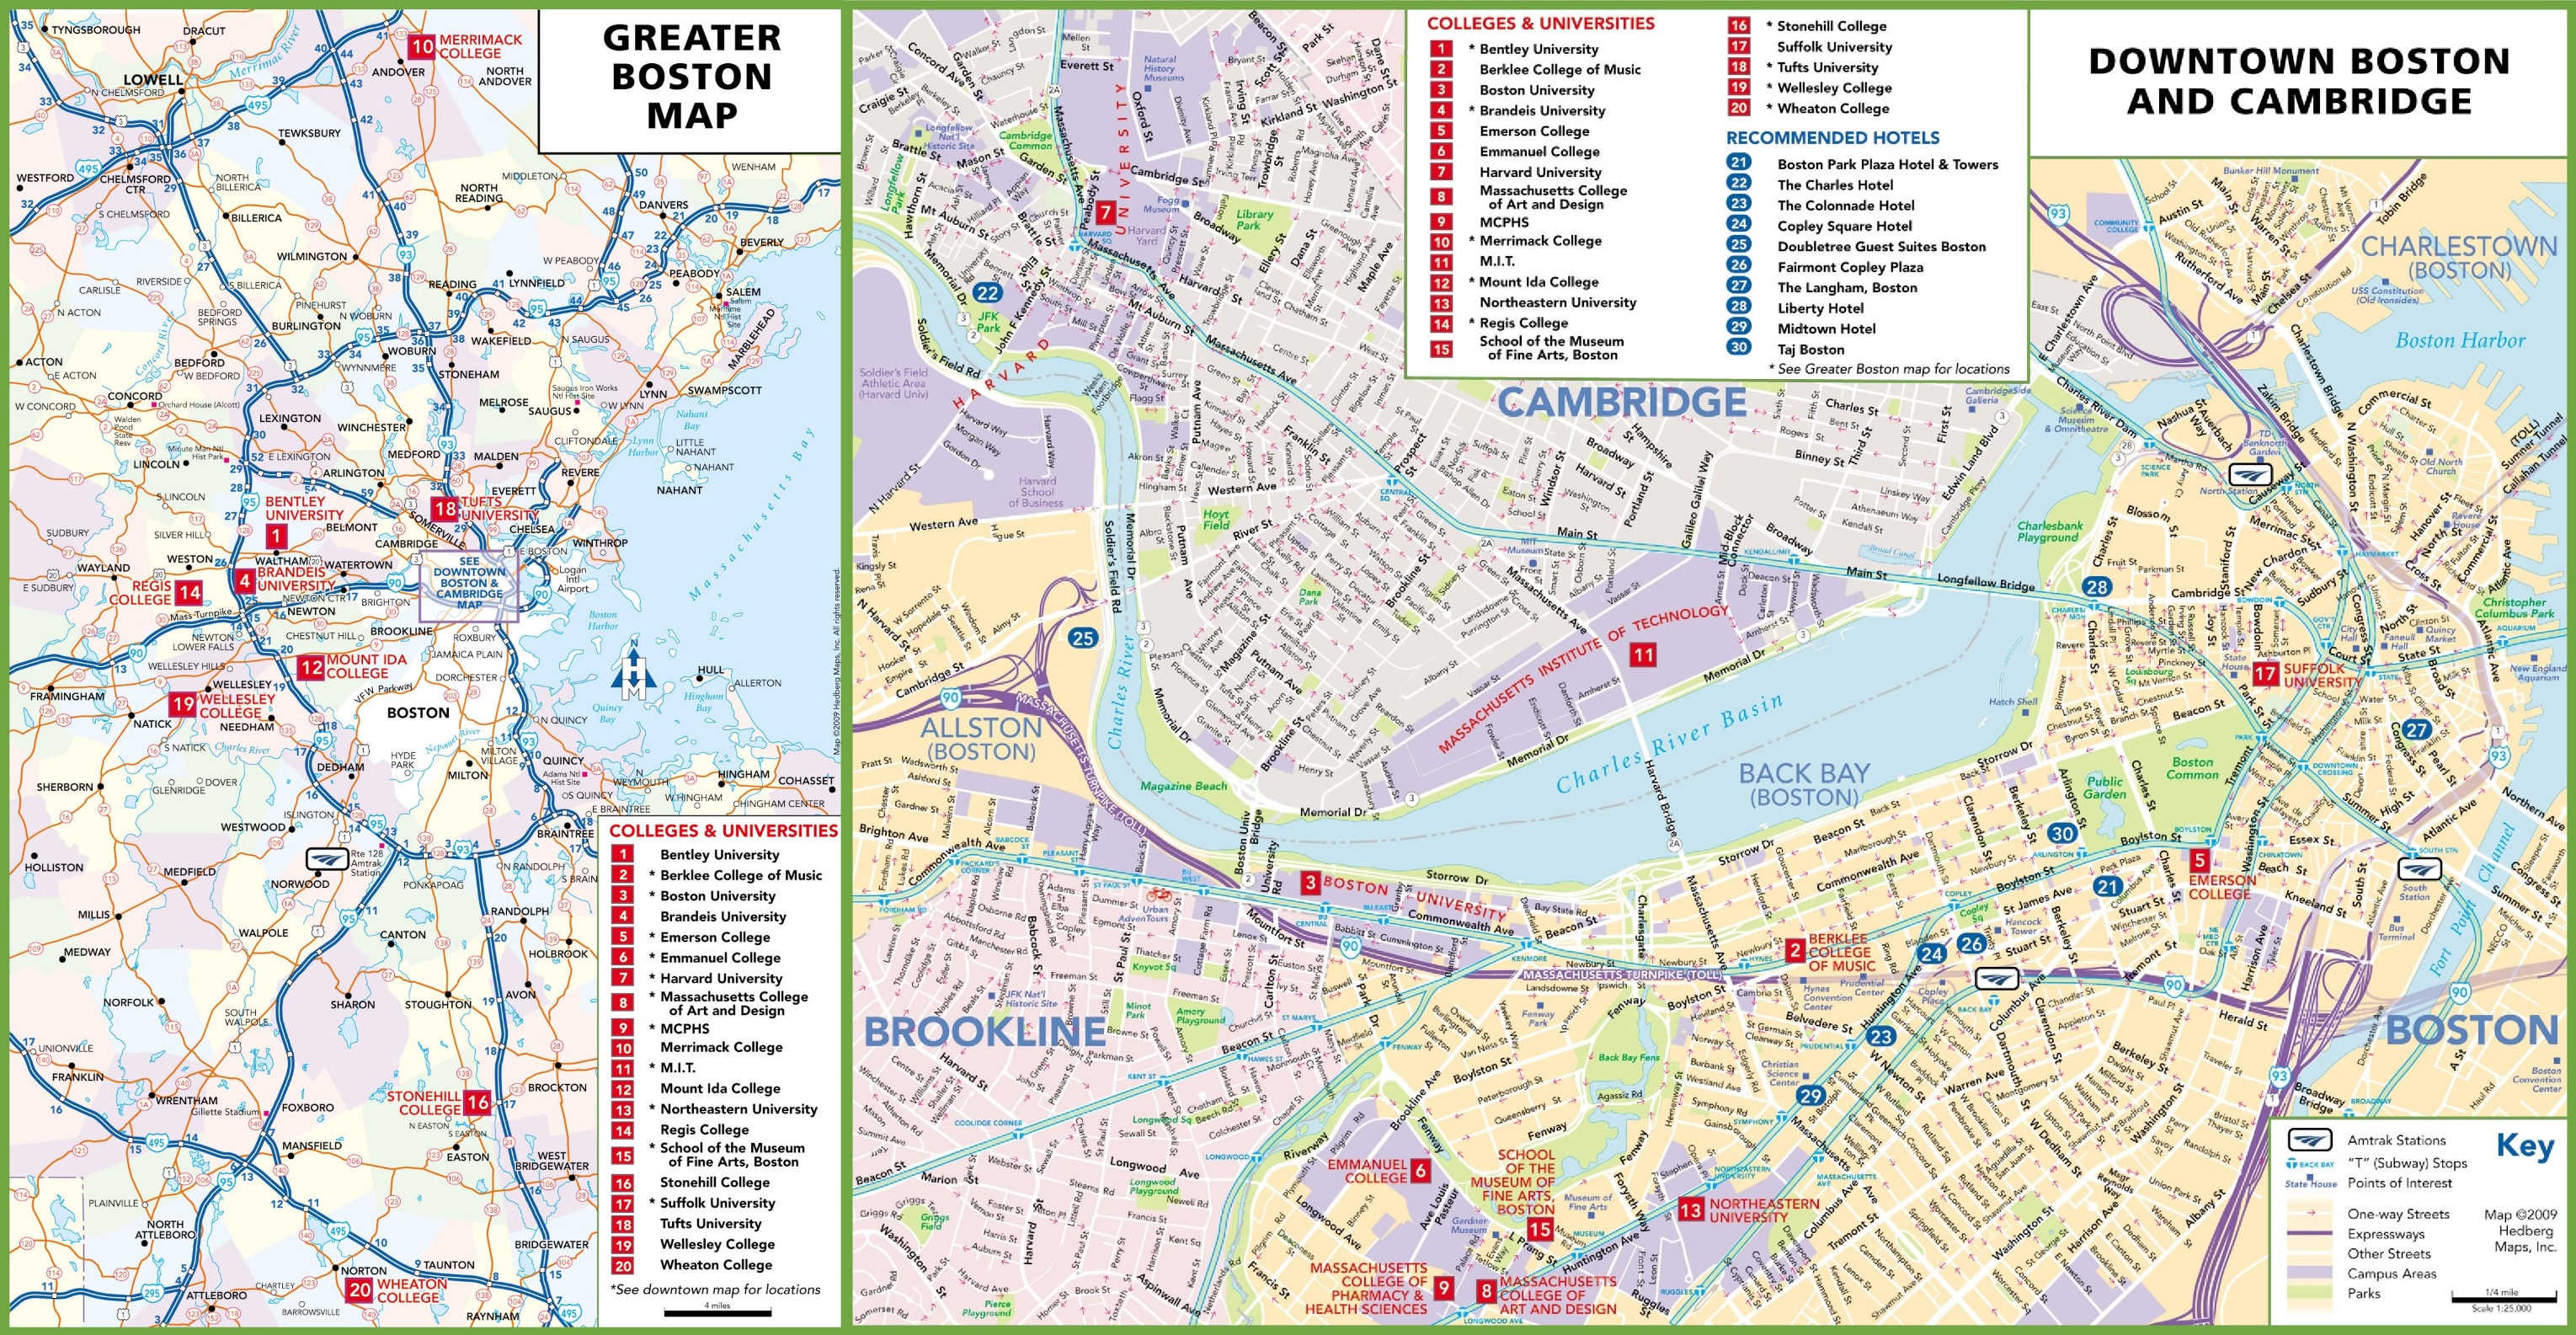 Boston Colleges And Universities Map